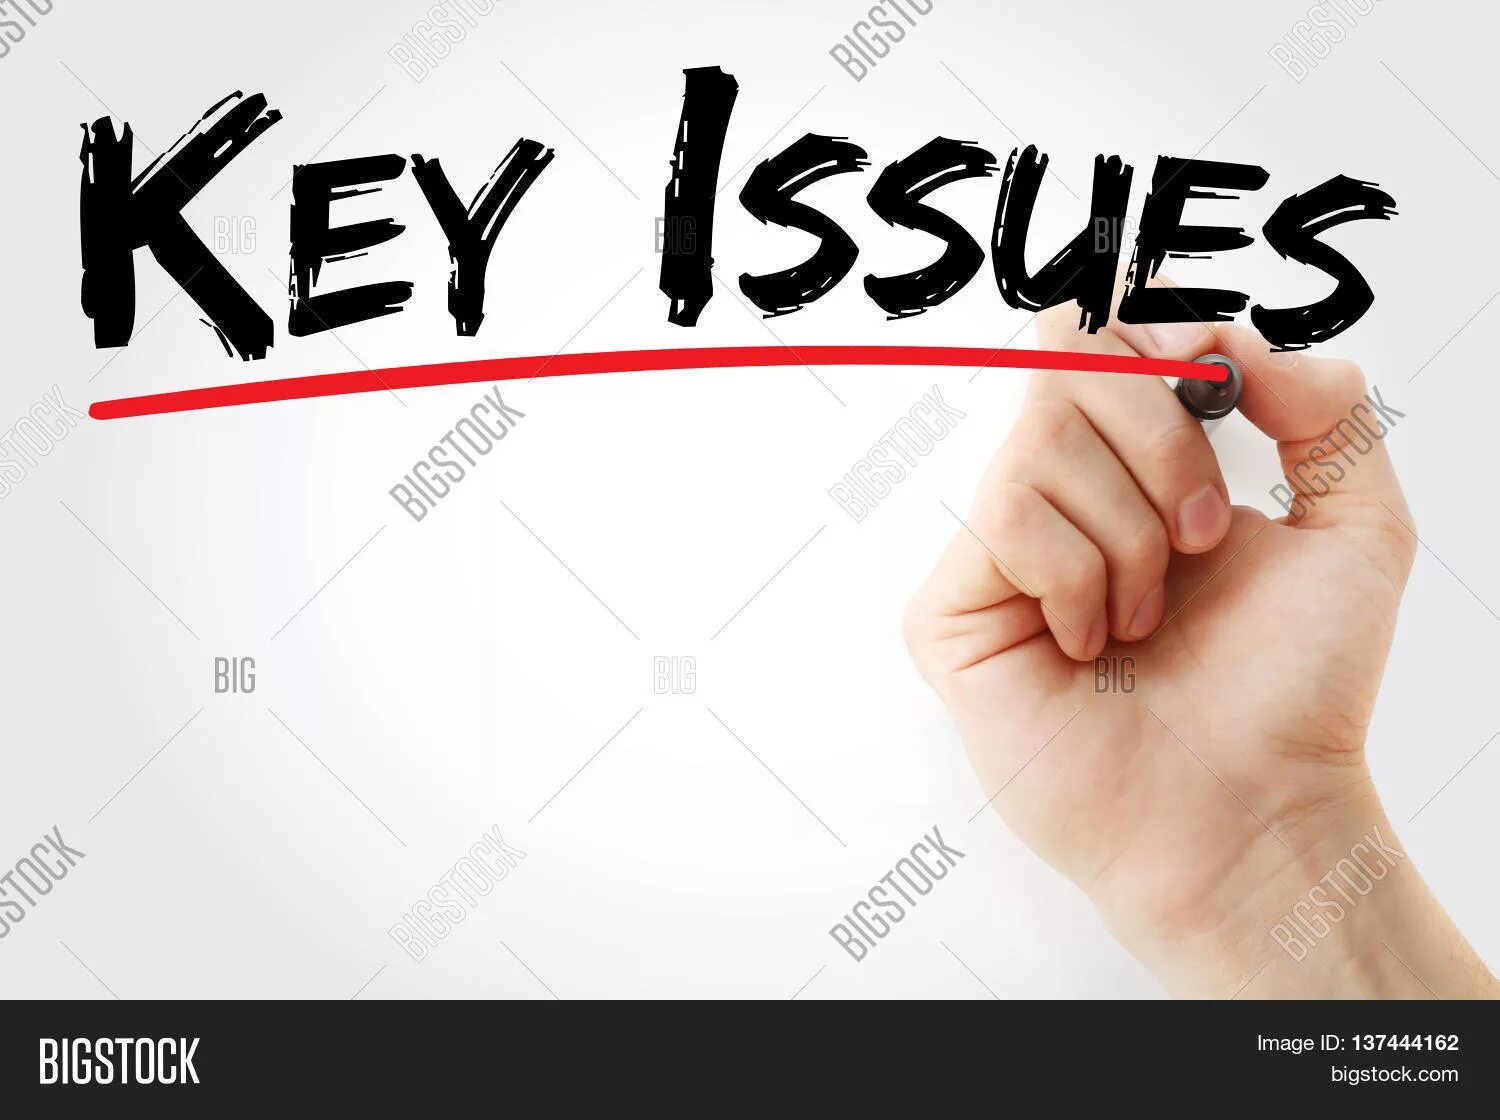 Issue картинка. Issues обложка. Main Issues картинка. Main Issues картинка для презентации. Main issues